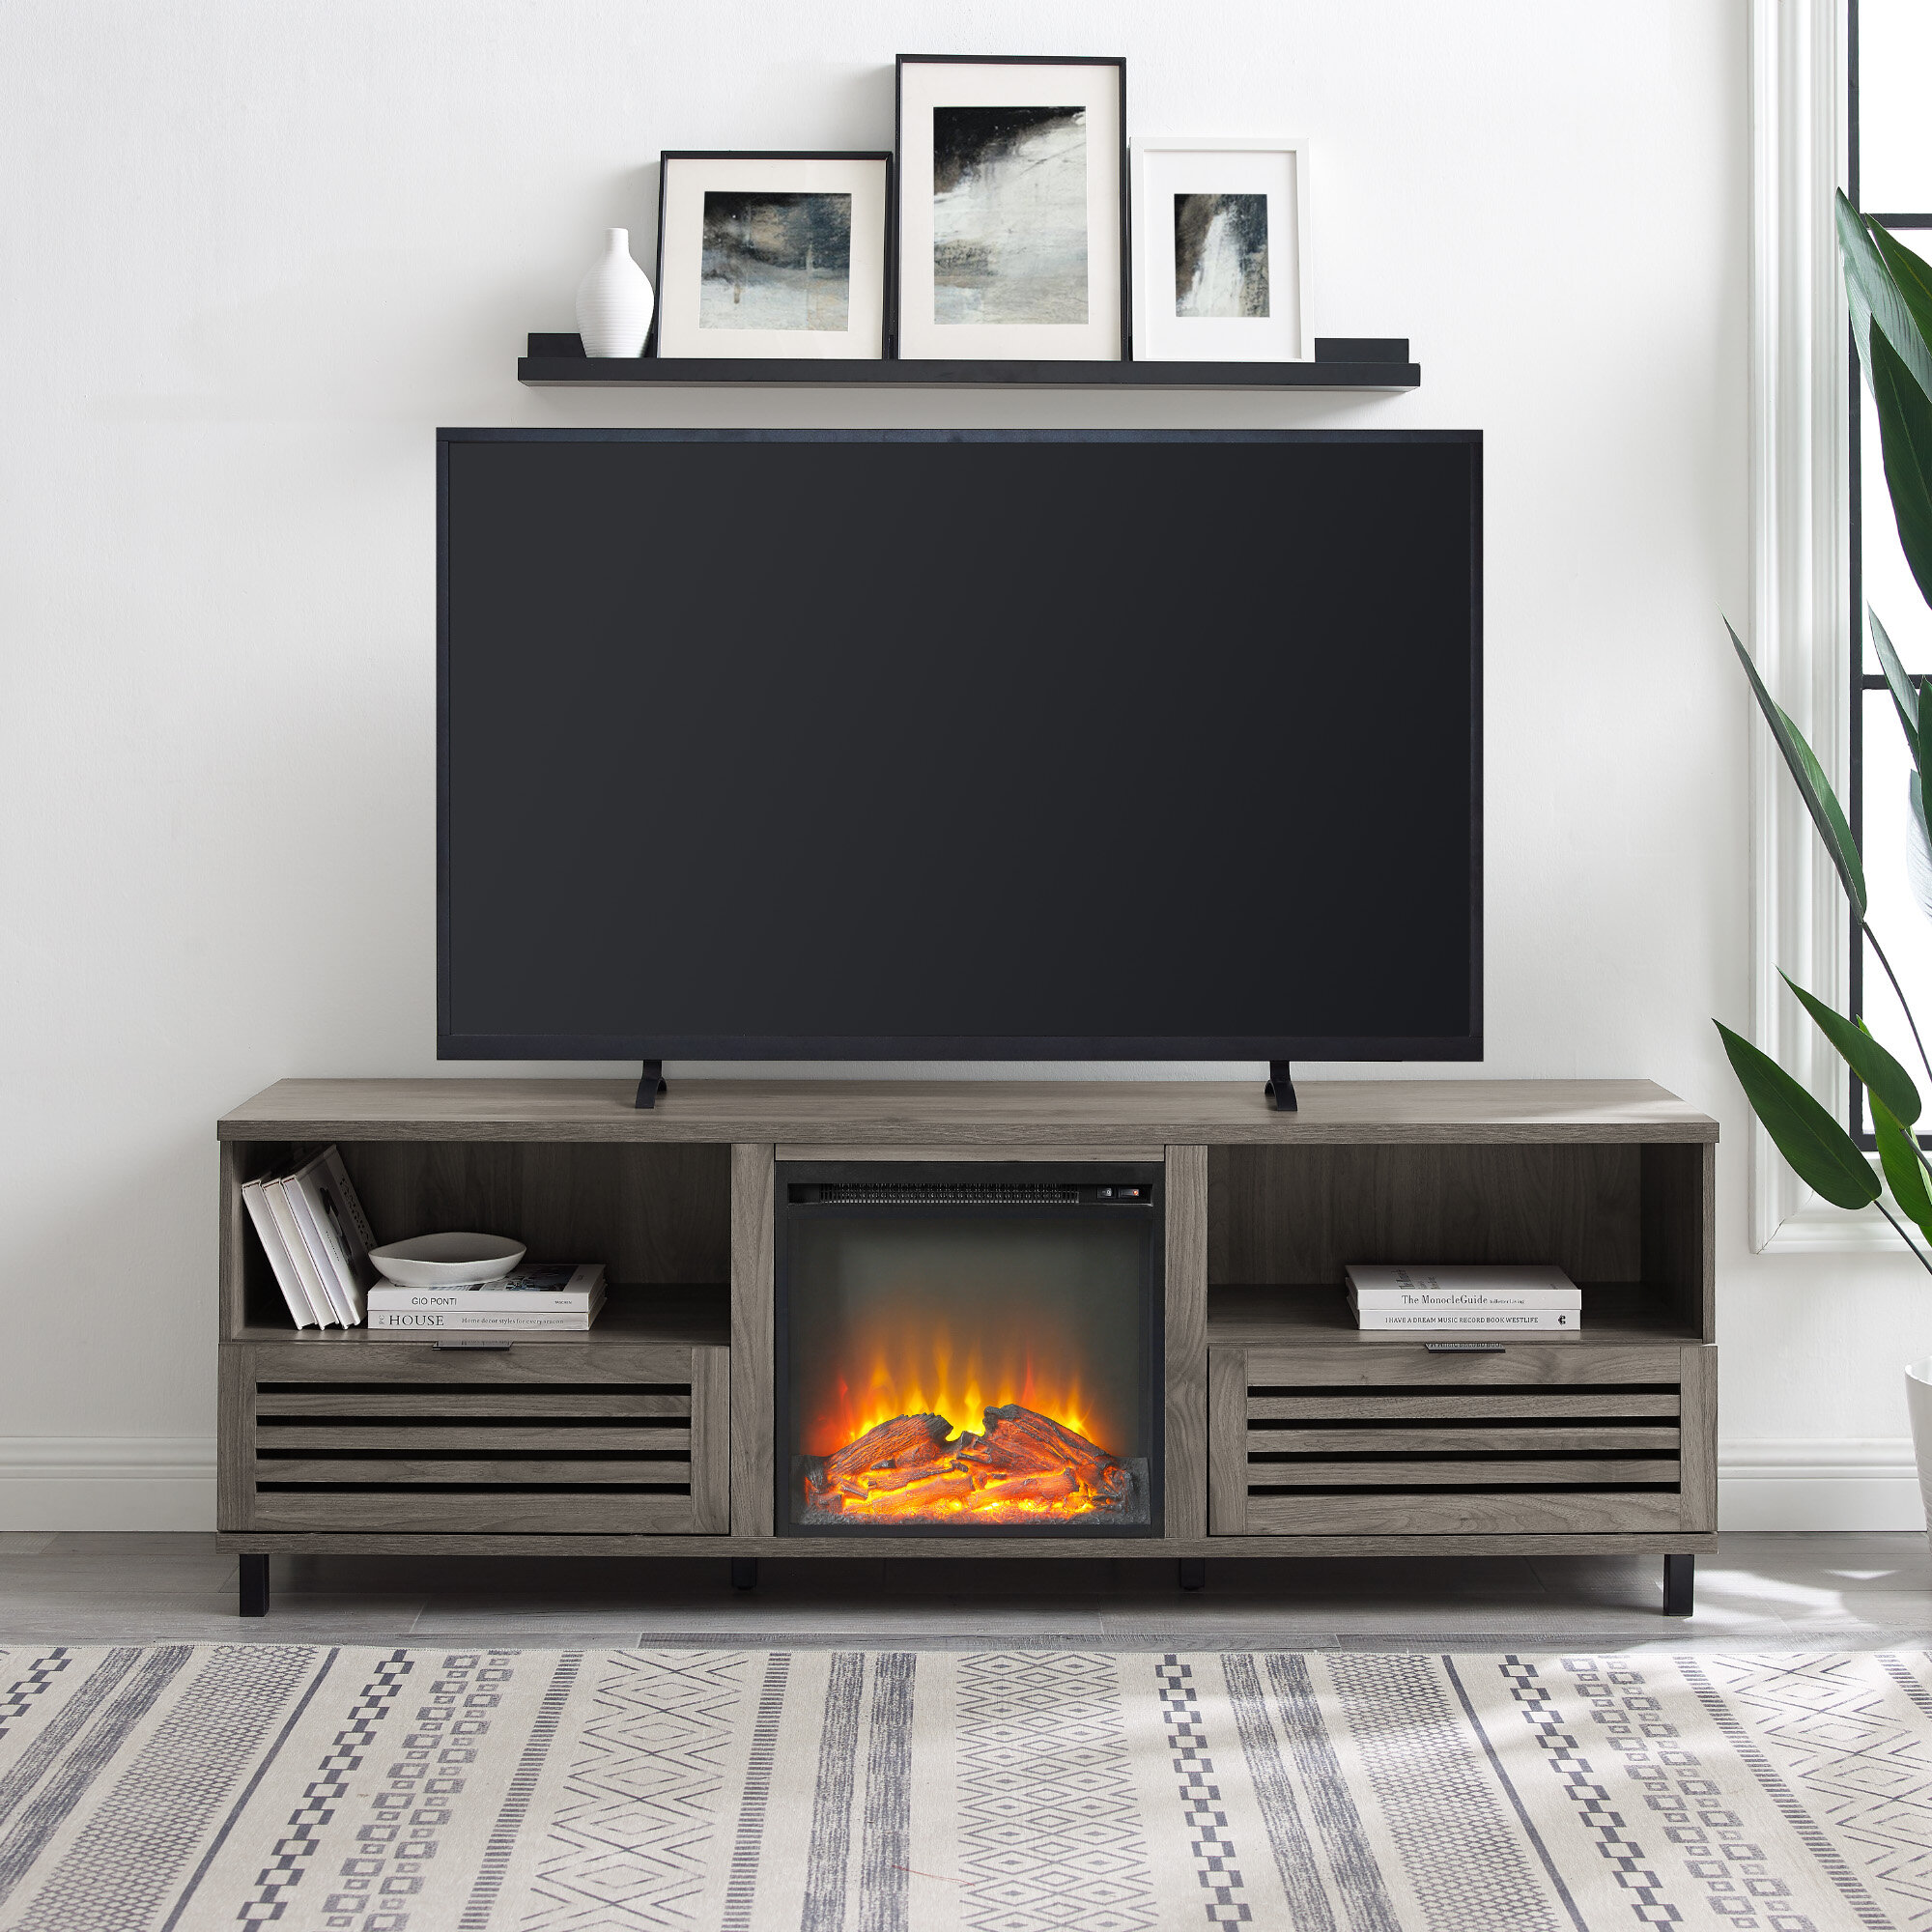 Iridenta TV Stand for TVs up to 80" with Fireplace Included